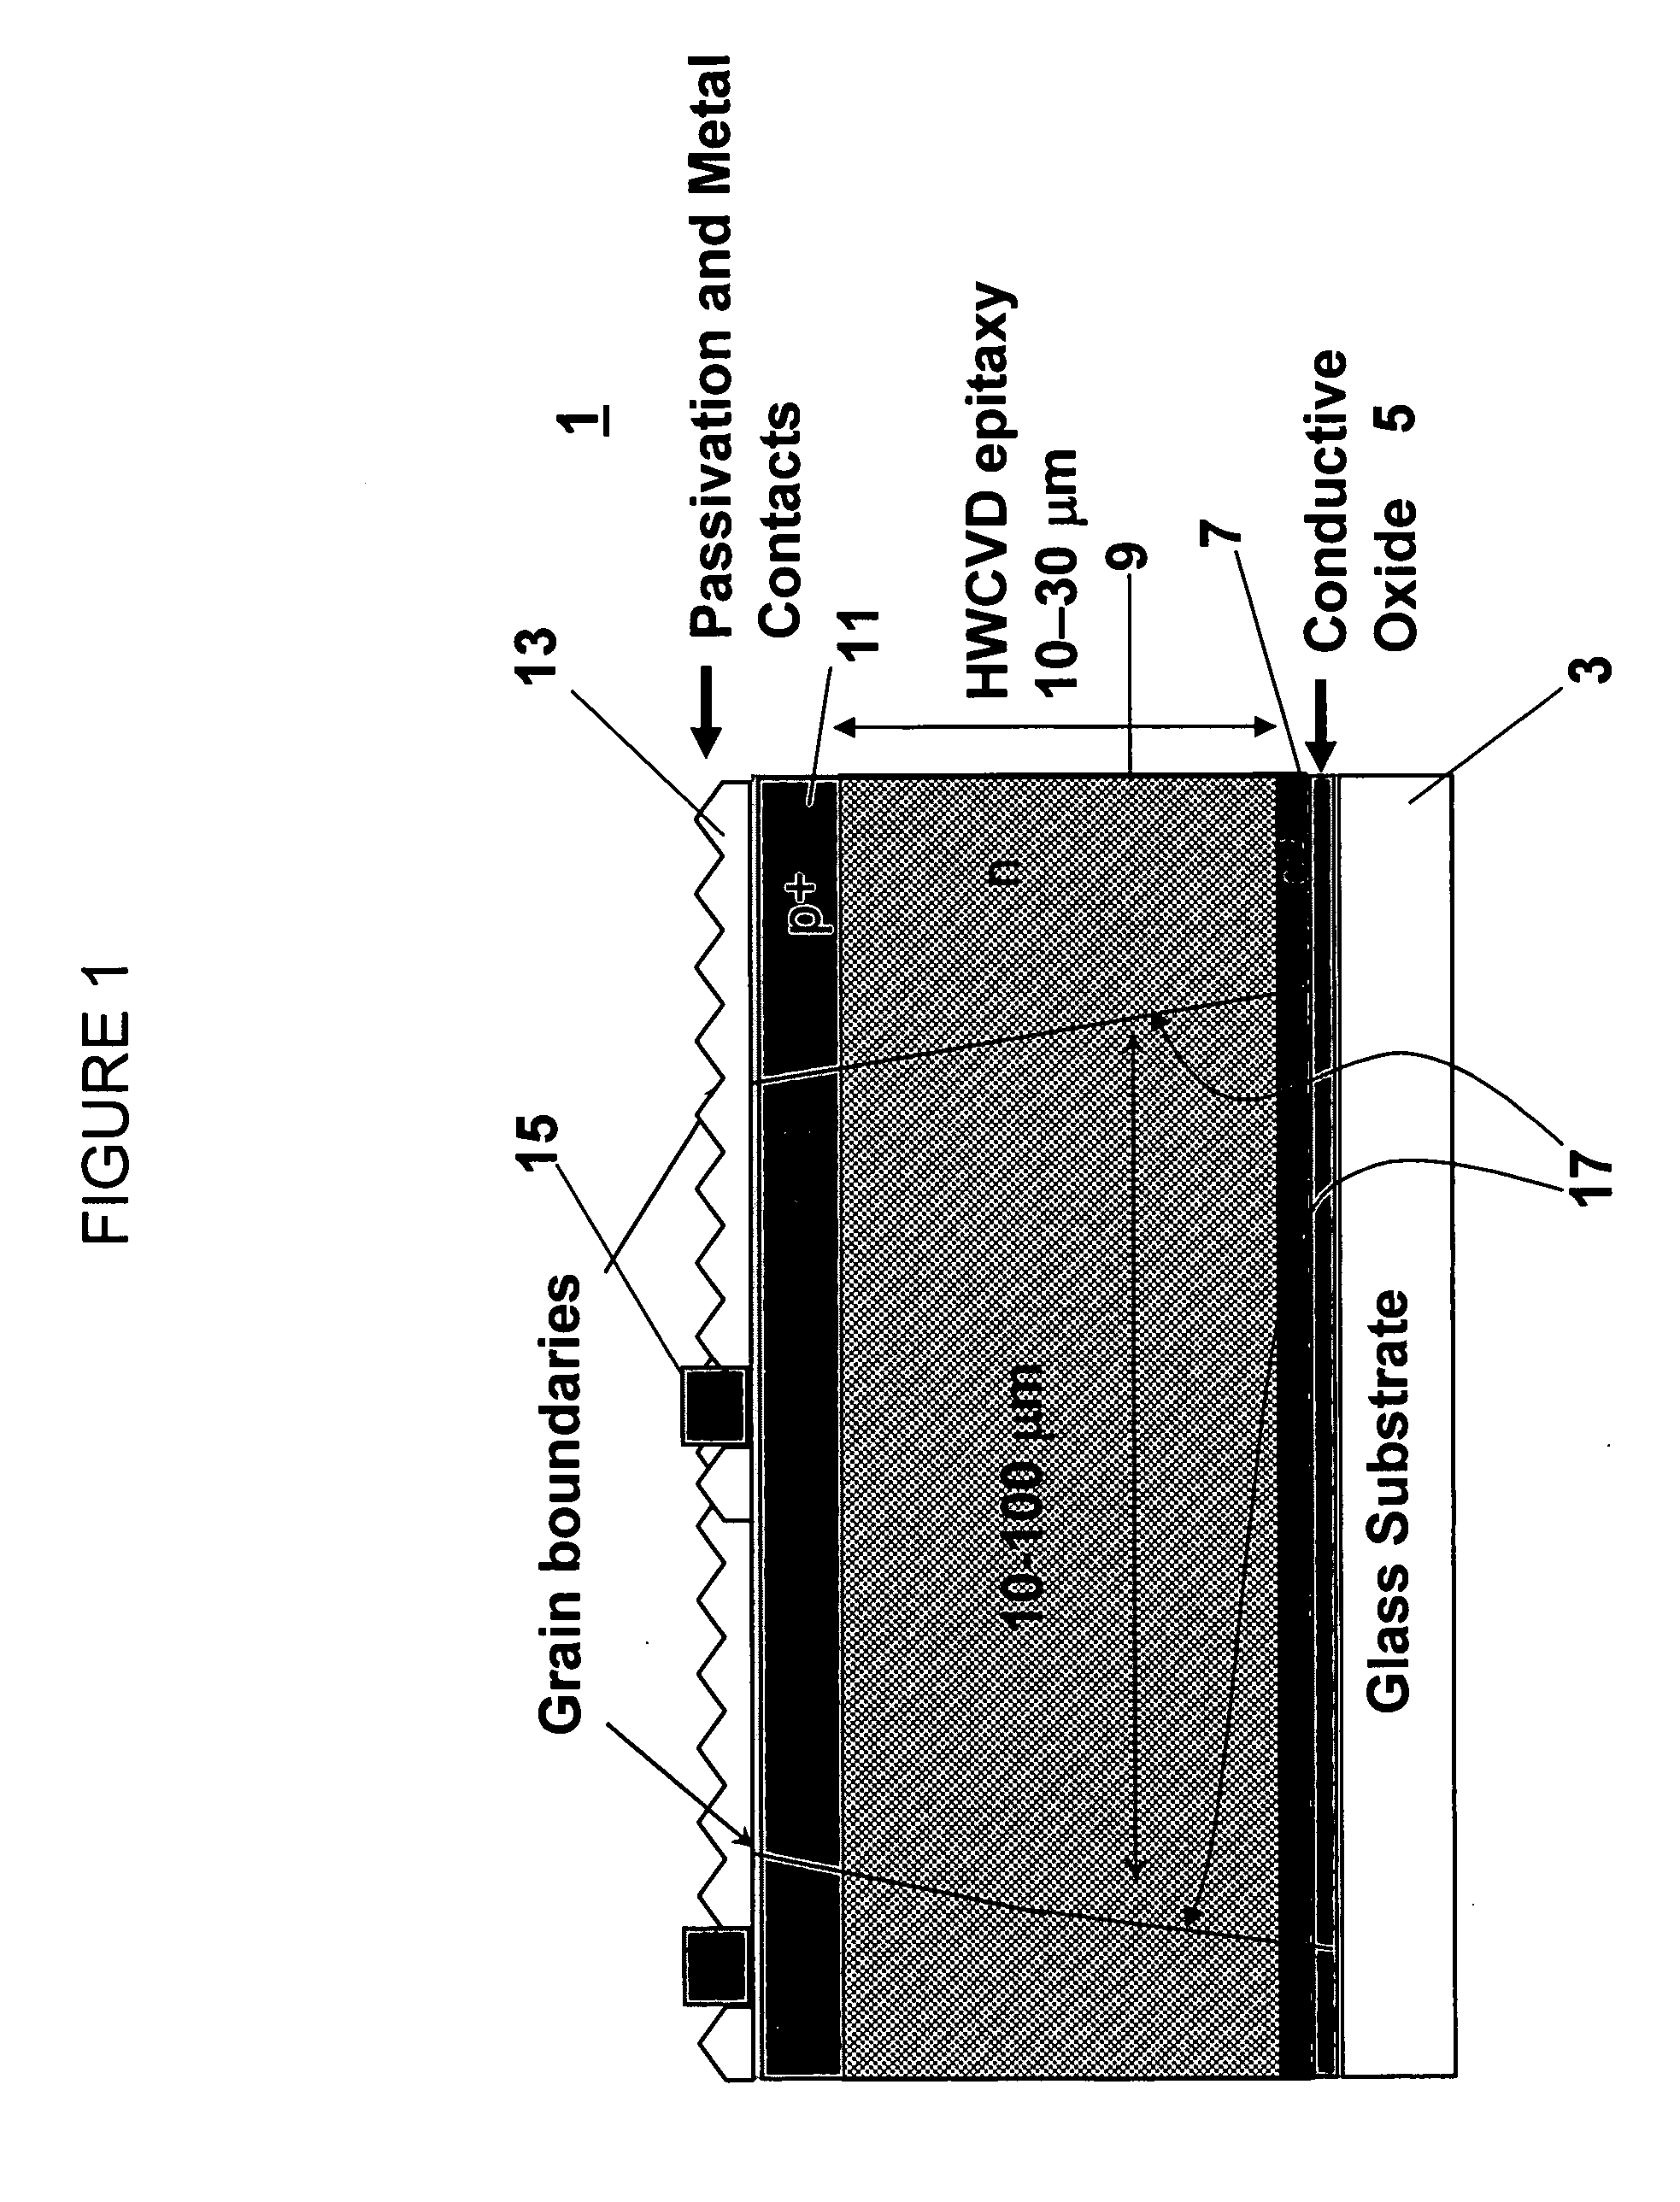 Large grained polycrystalline silicon and method of making same